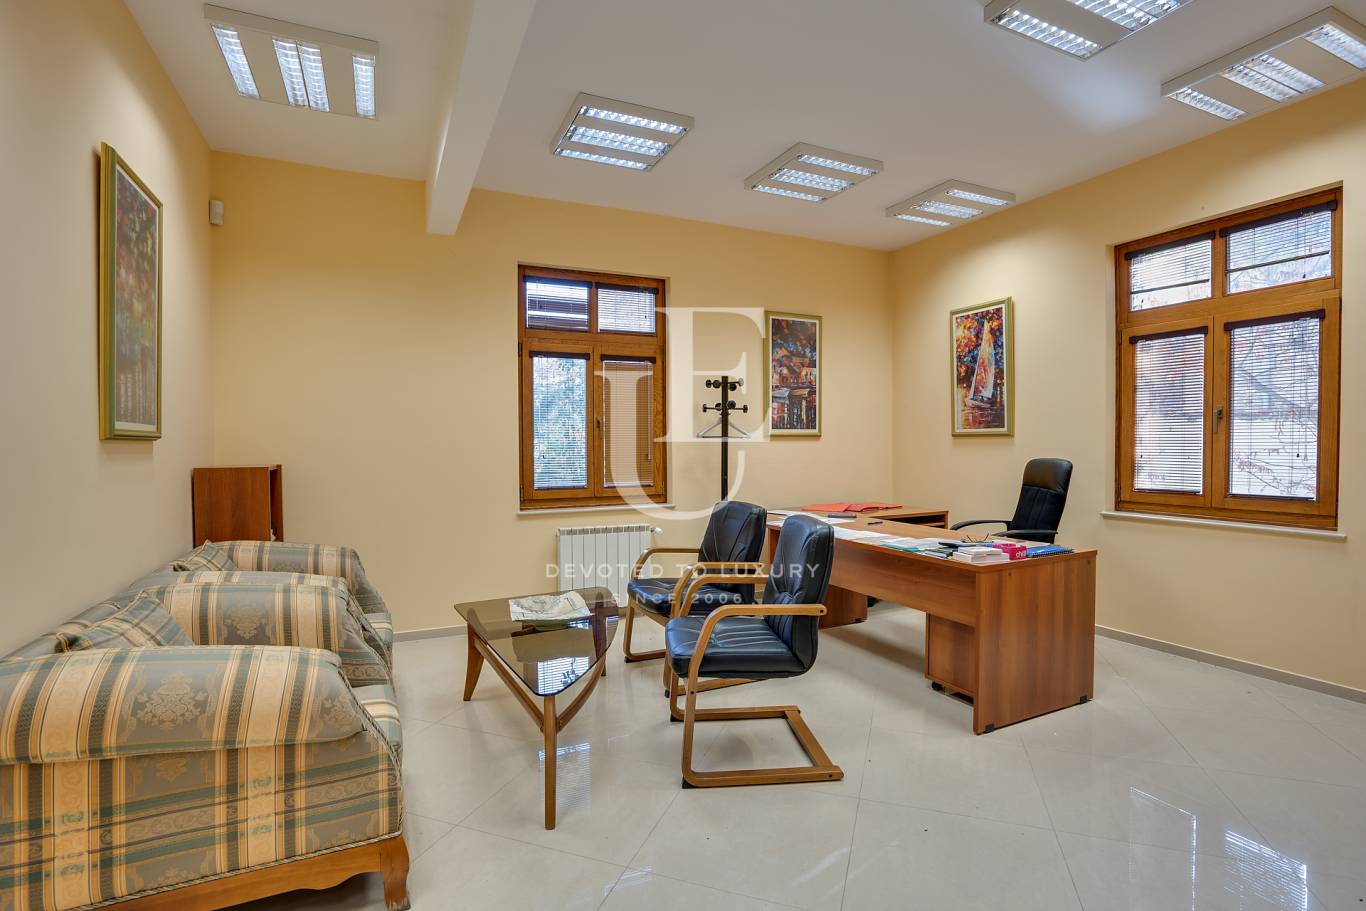 Office for sale in Sofia, Downtown with listing ID: K14097 - image 4